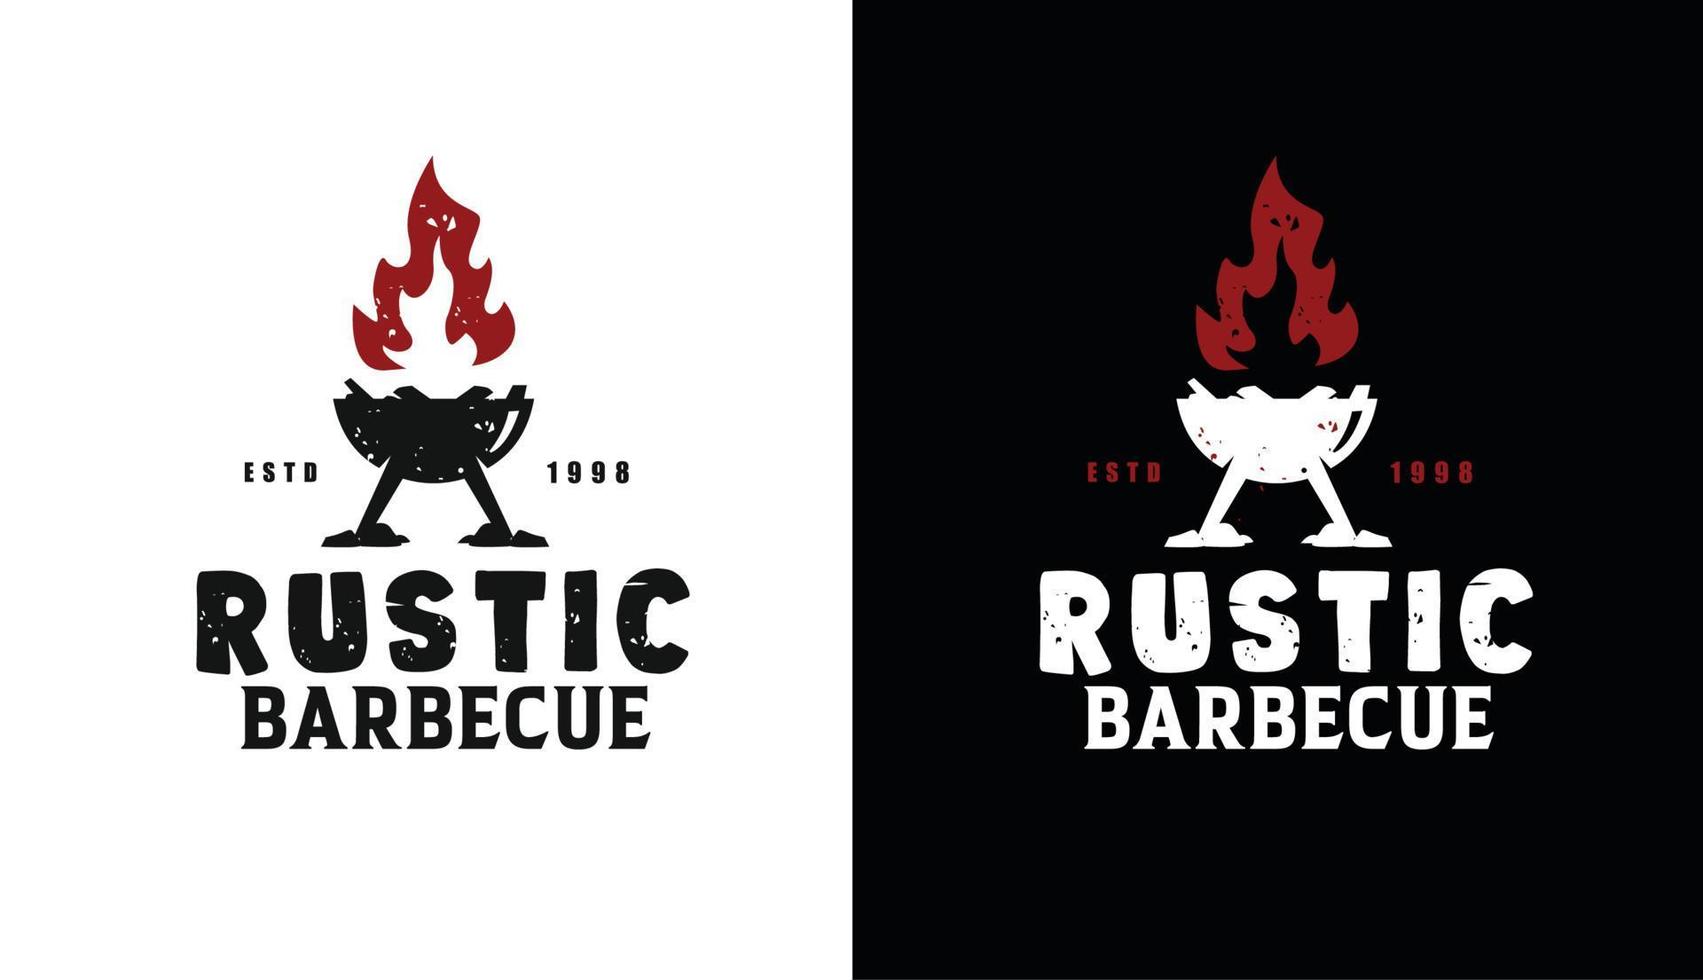 Vintage Retro Rustic BBQ Grill with fire, Barbeque Label logo design vector